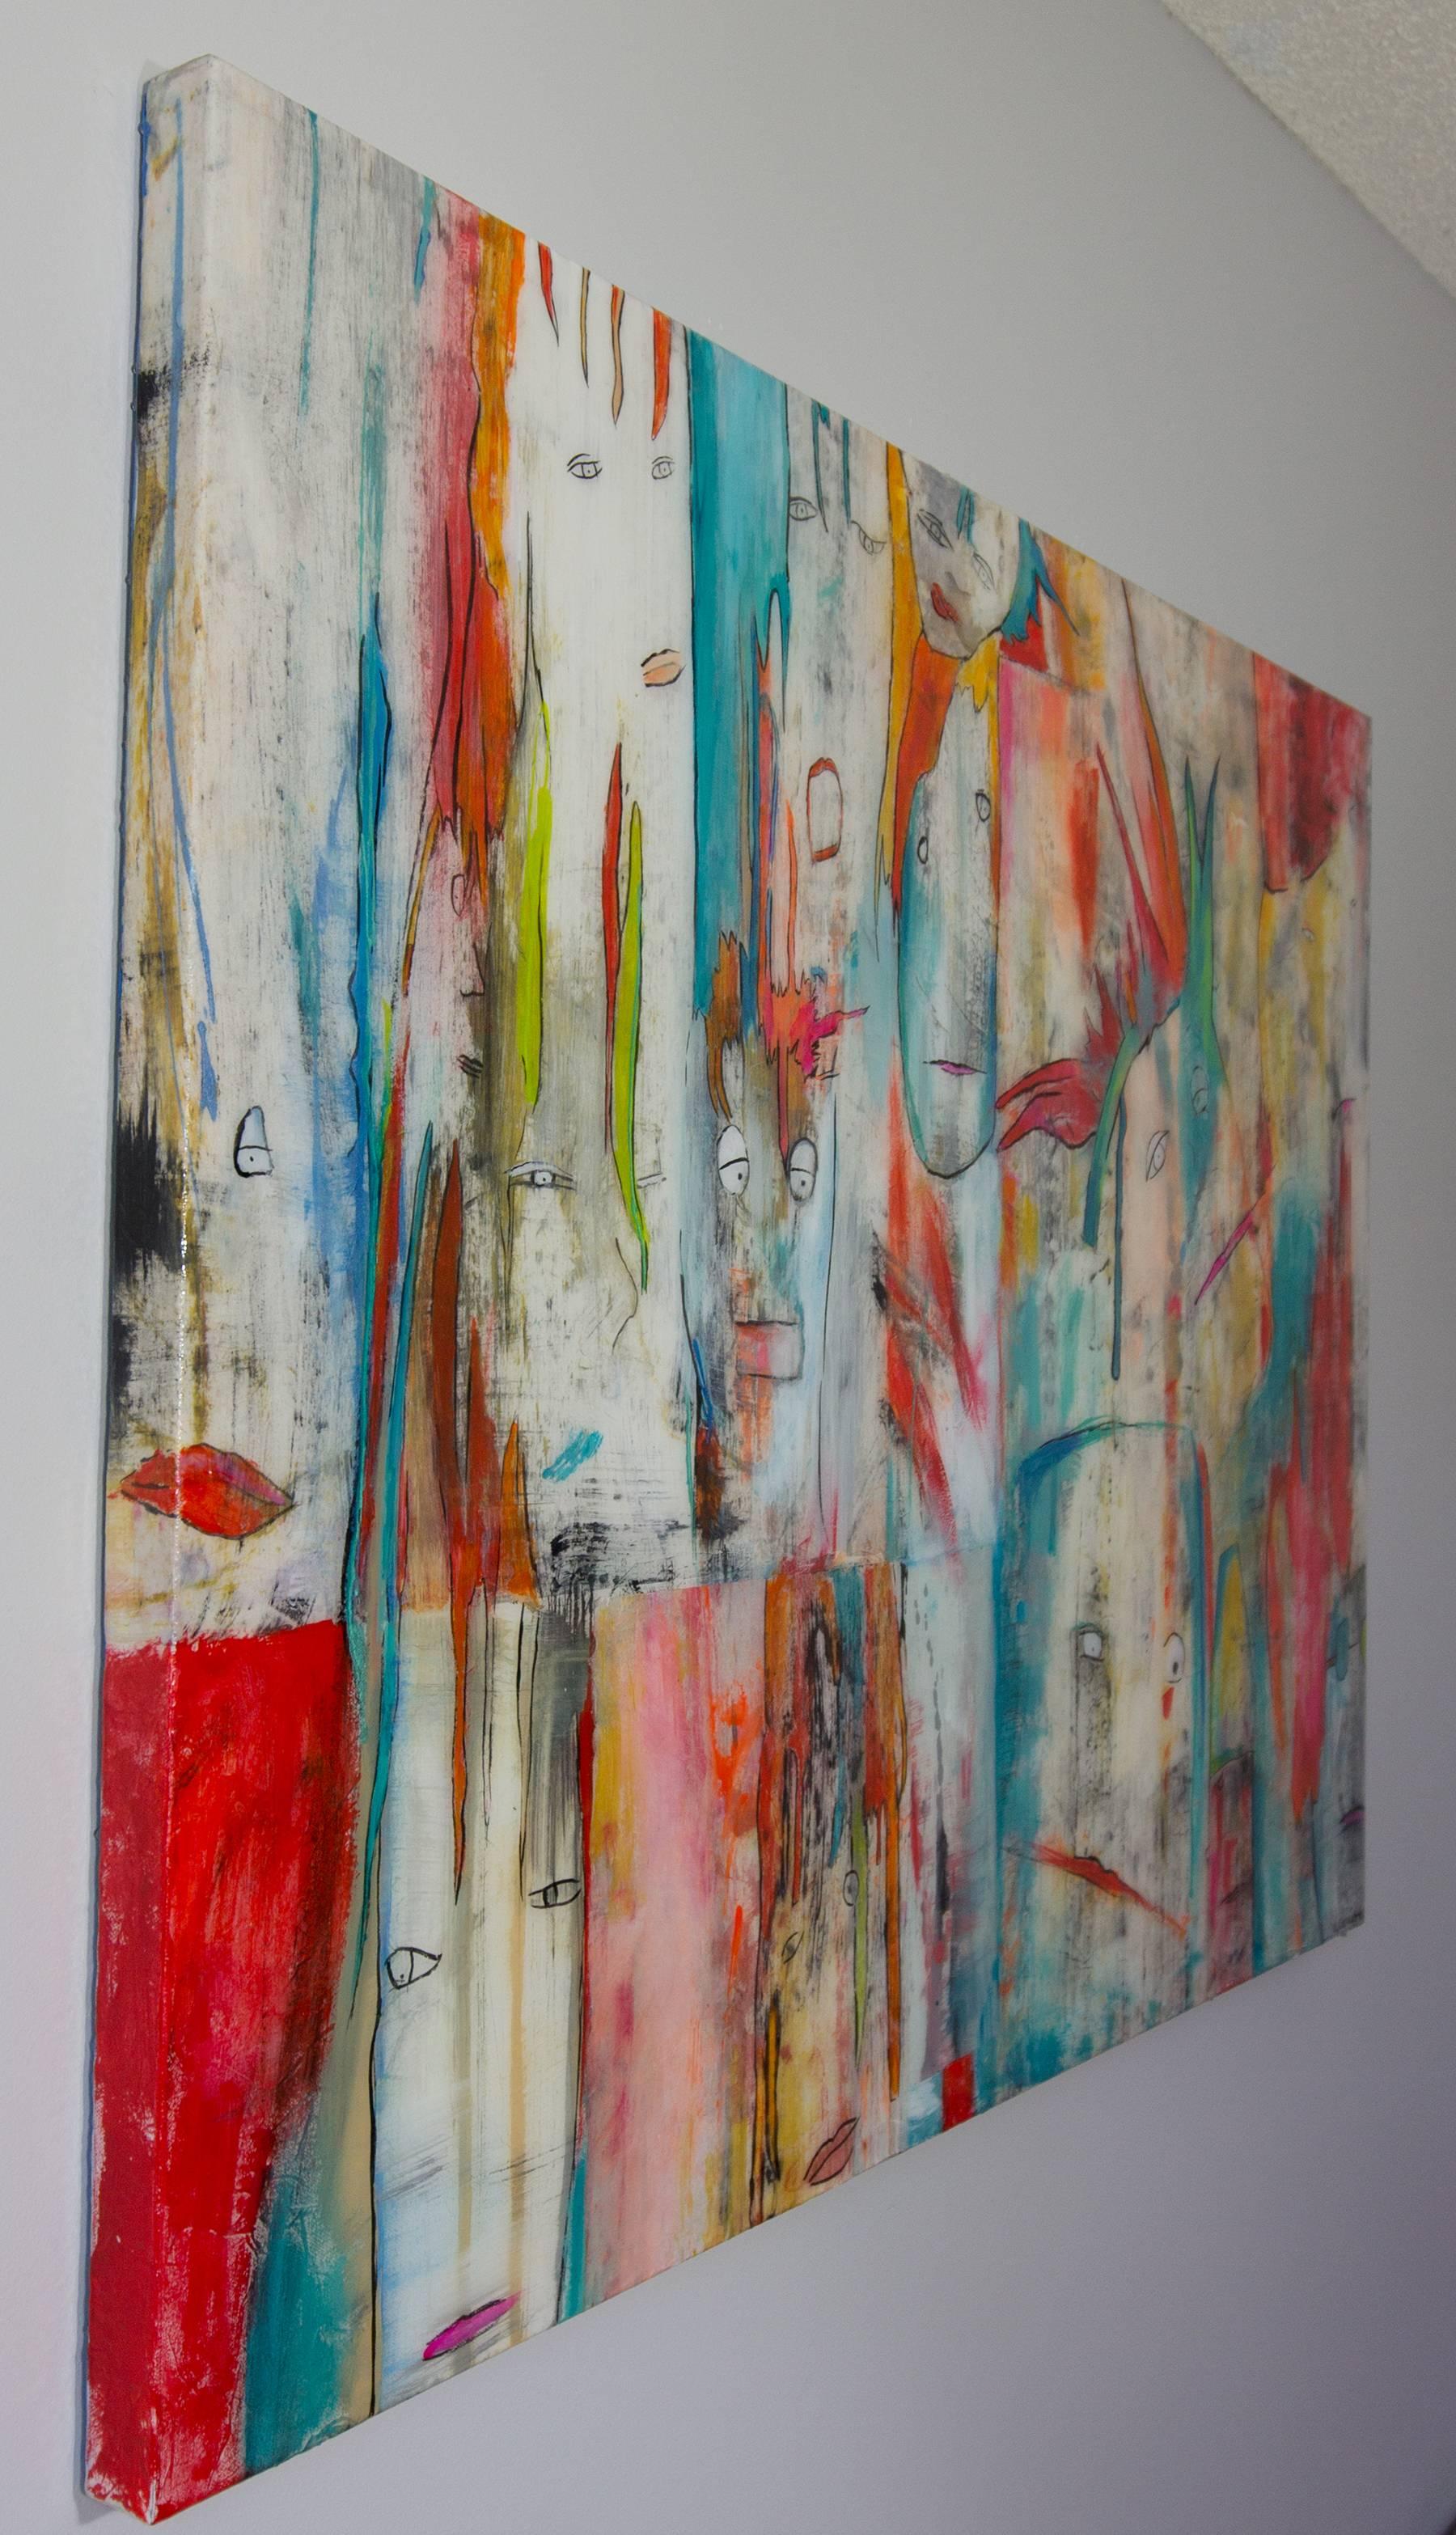 1969 - Abstract Mixed Media Art by Jill Concetta